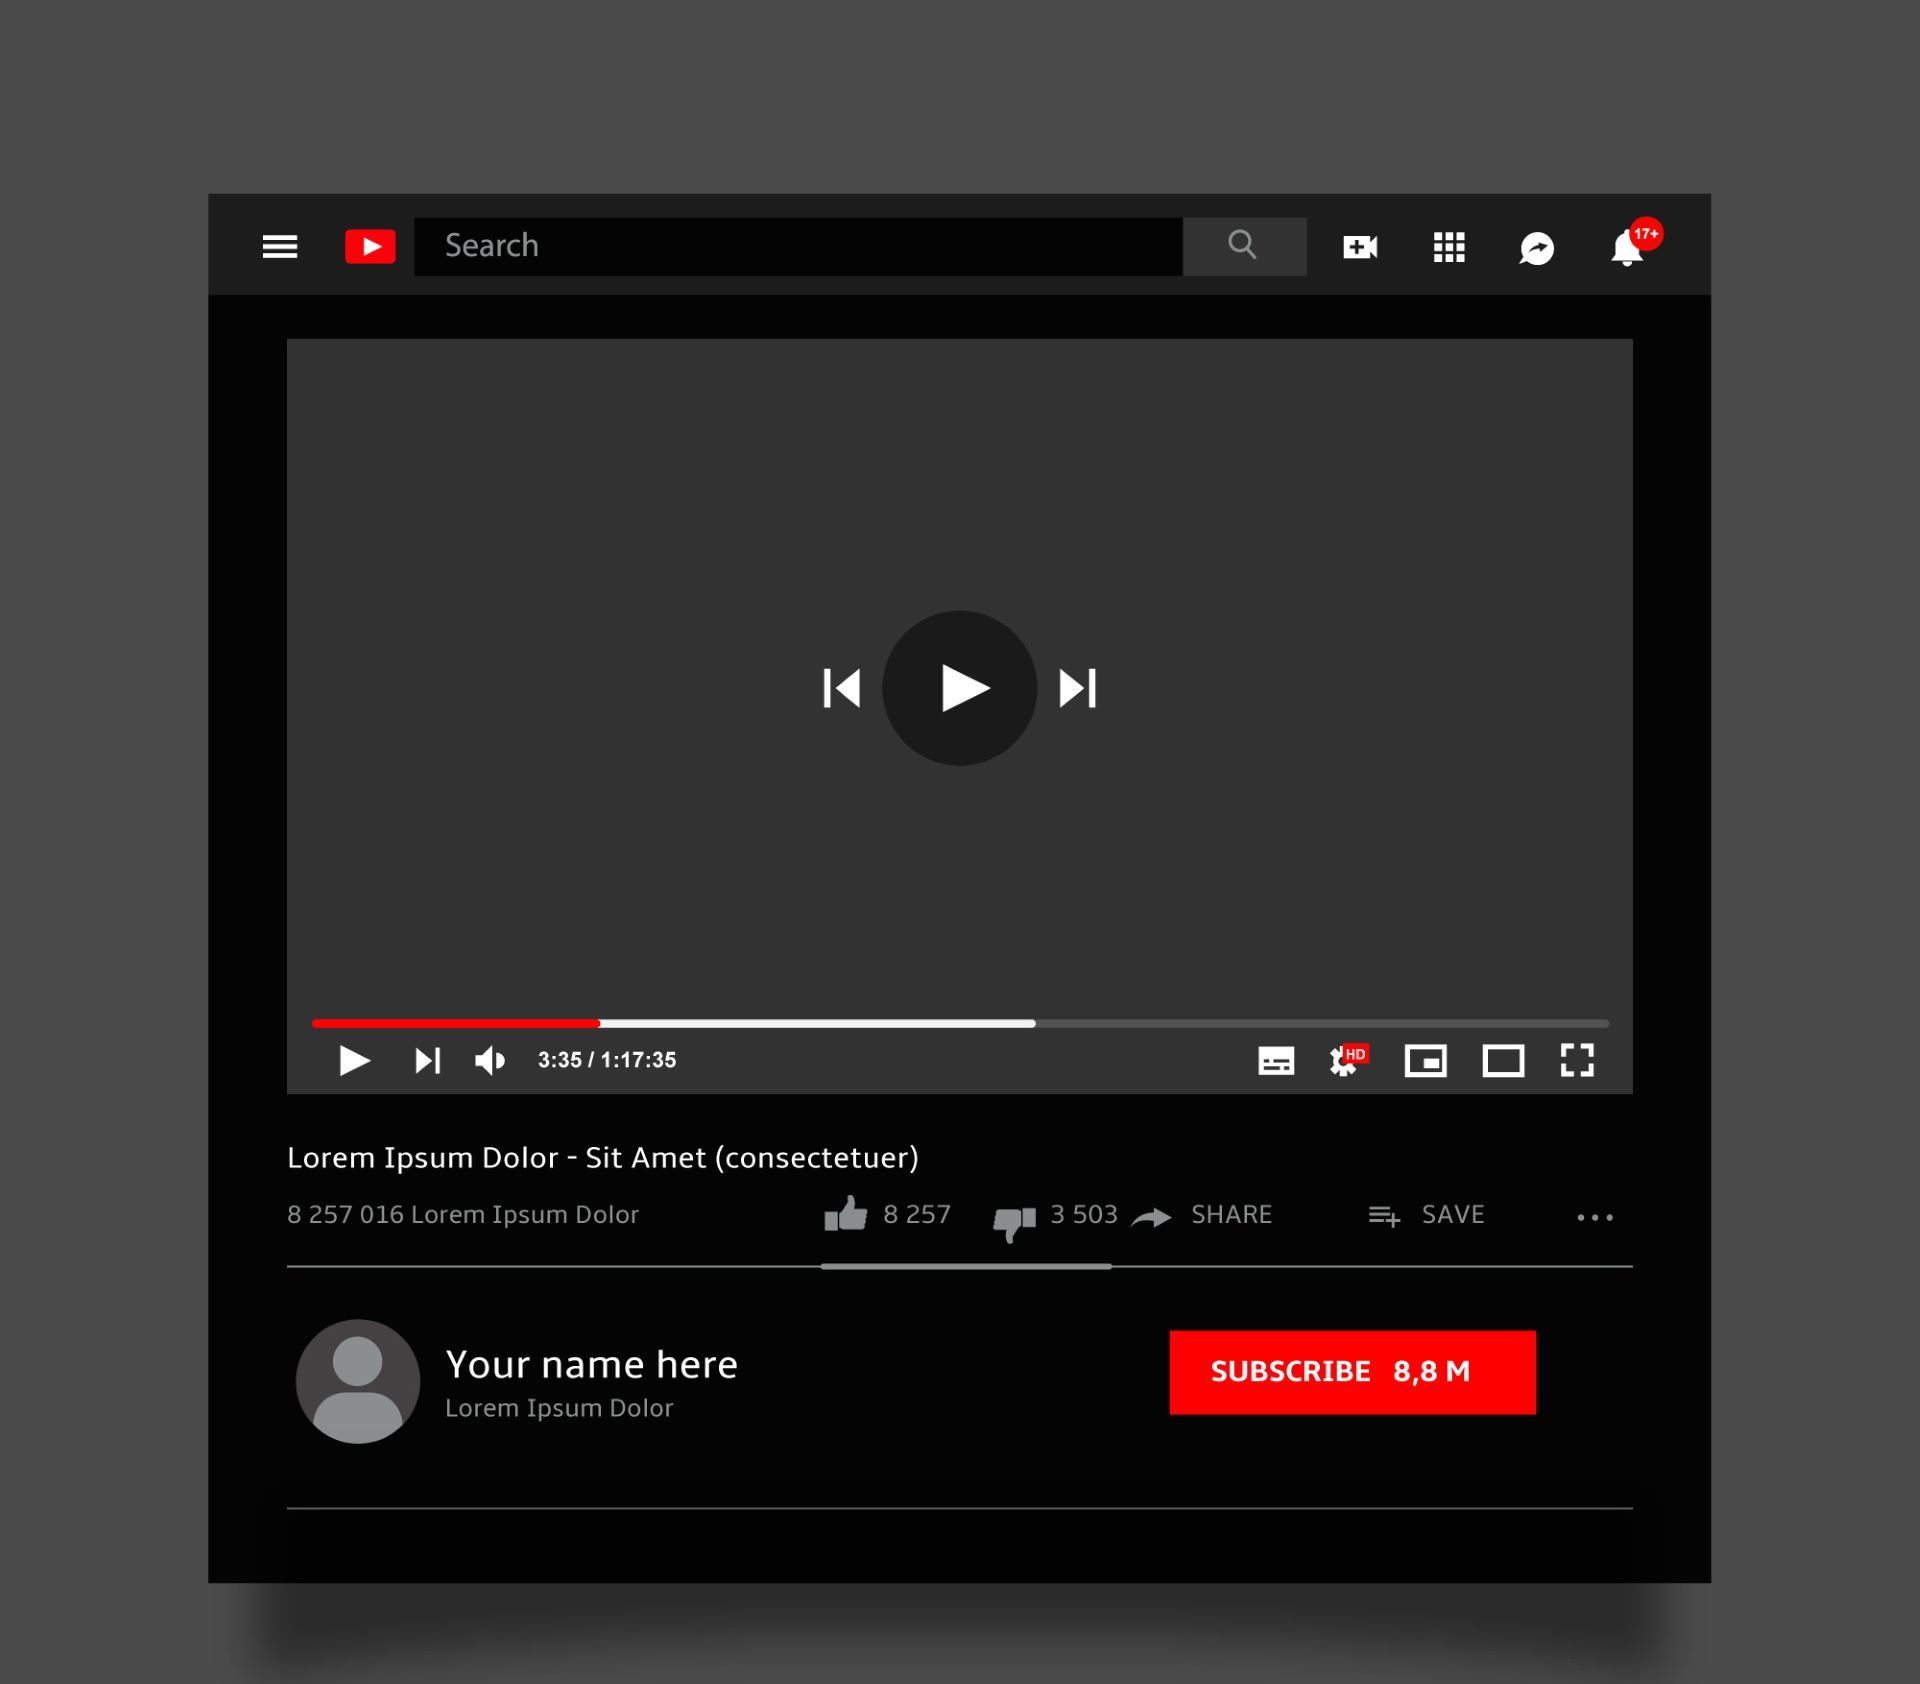 Tracking YouTube Usage: Users Gain Insights into their Video Viewing Time